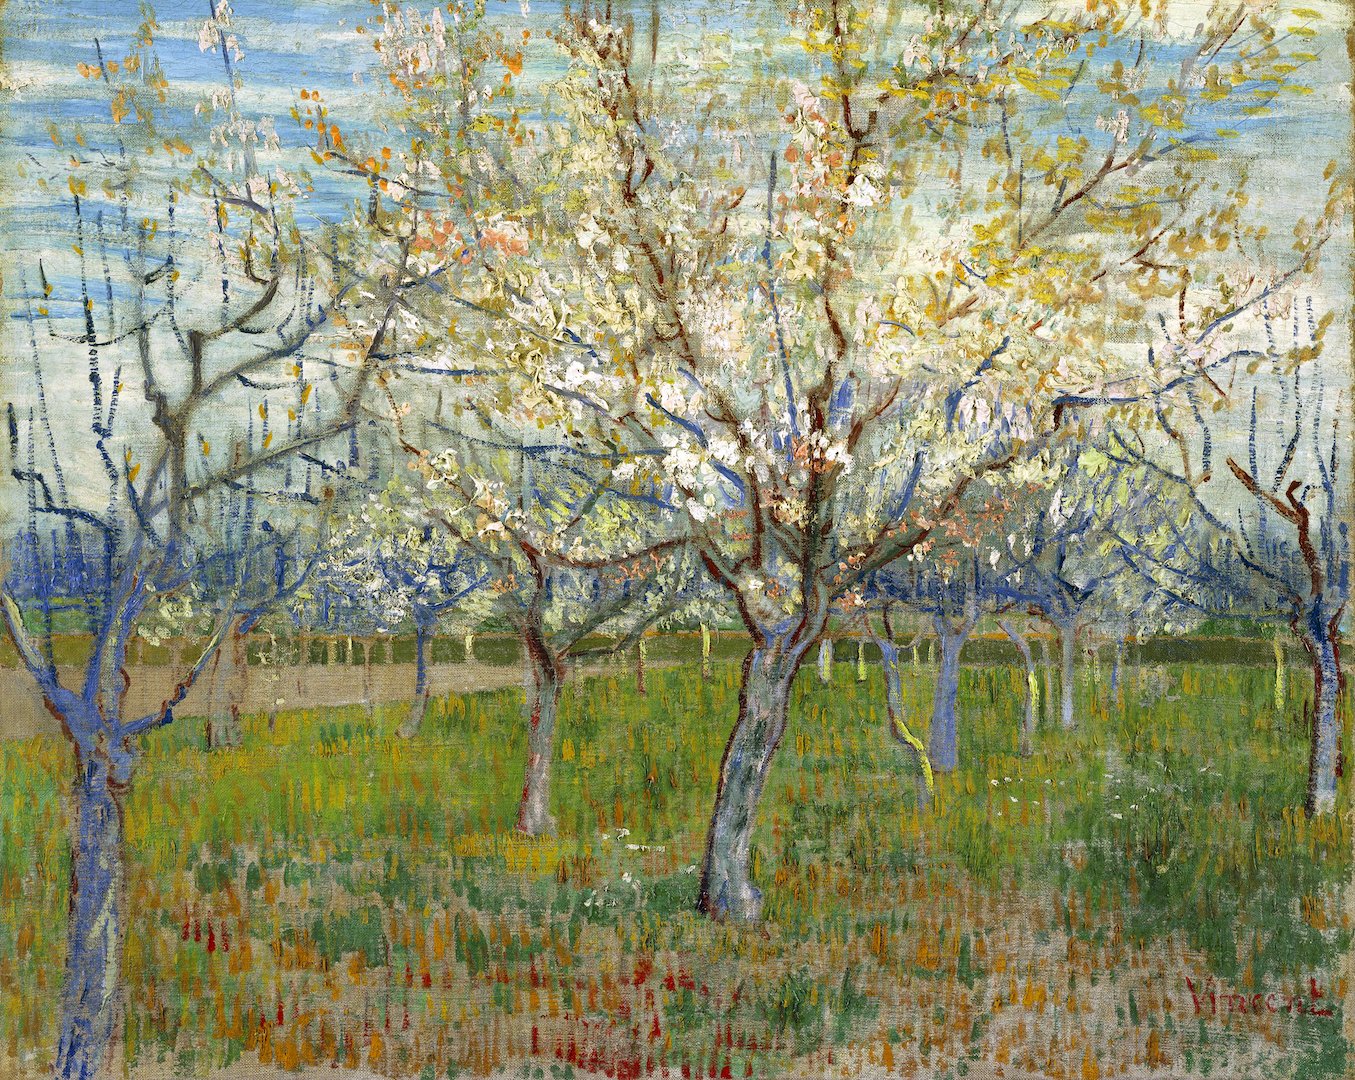 Orchard with Blossoming Apricot Trees, 1888